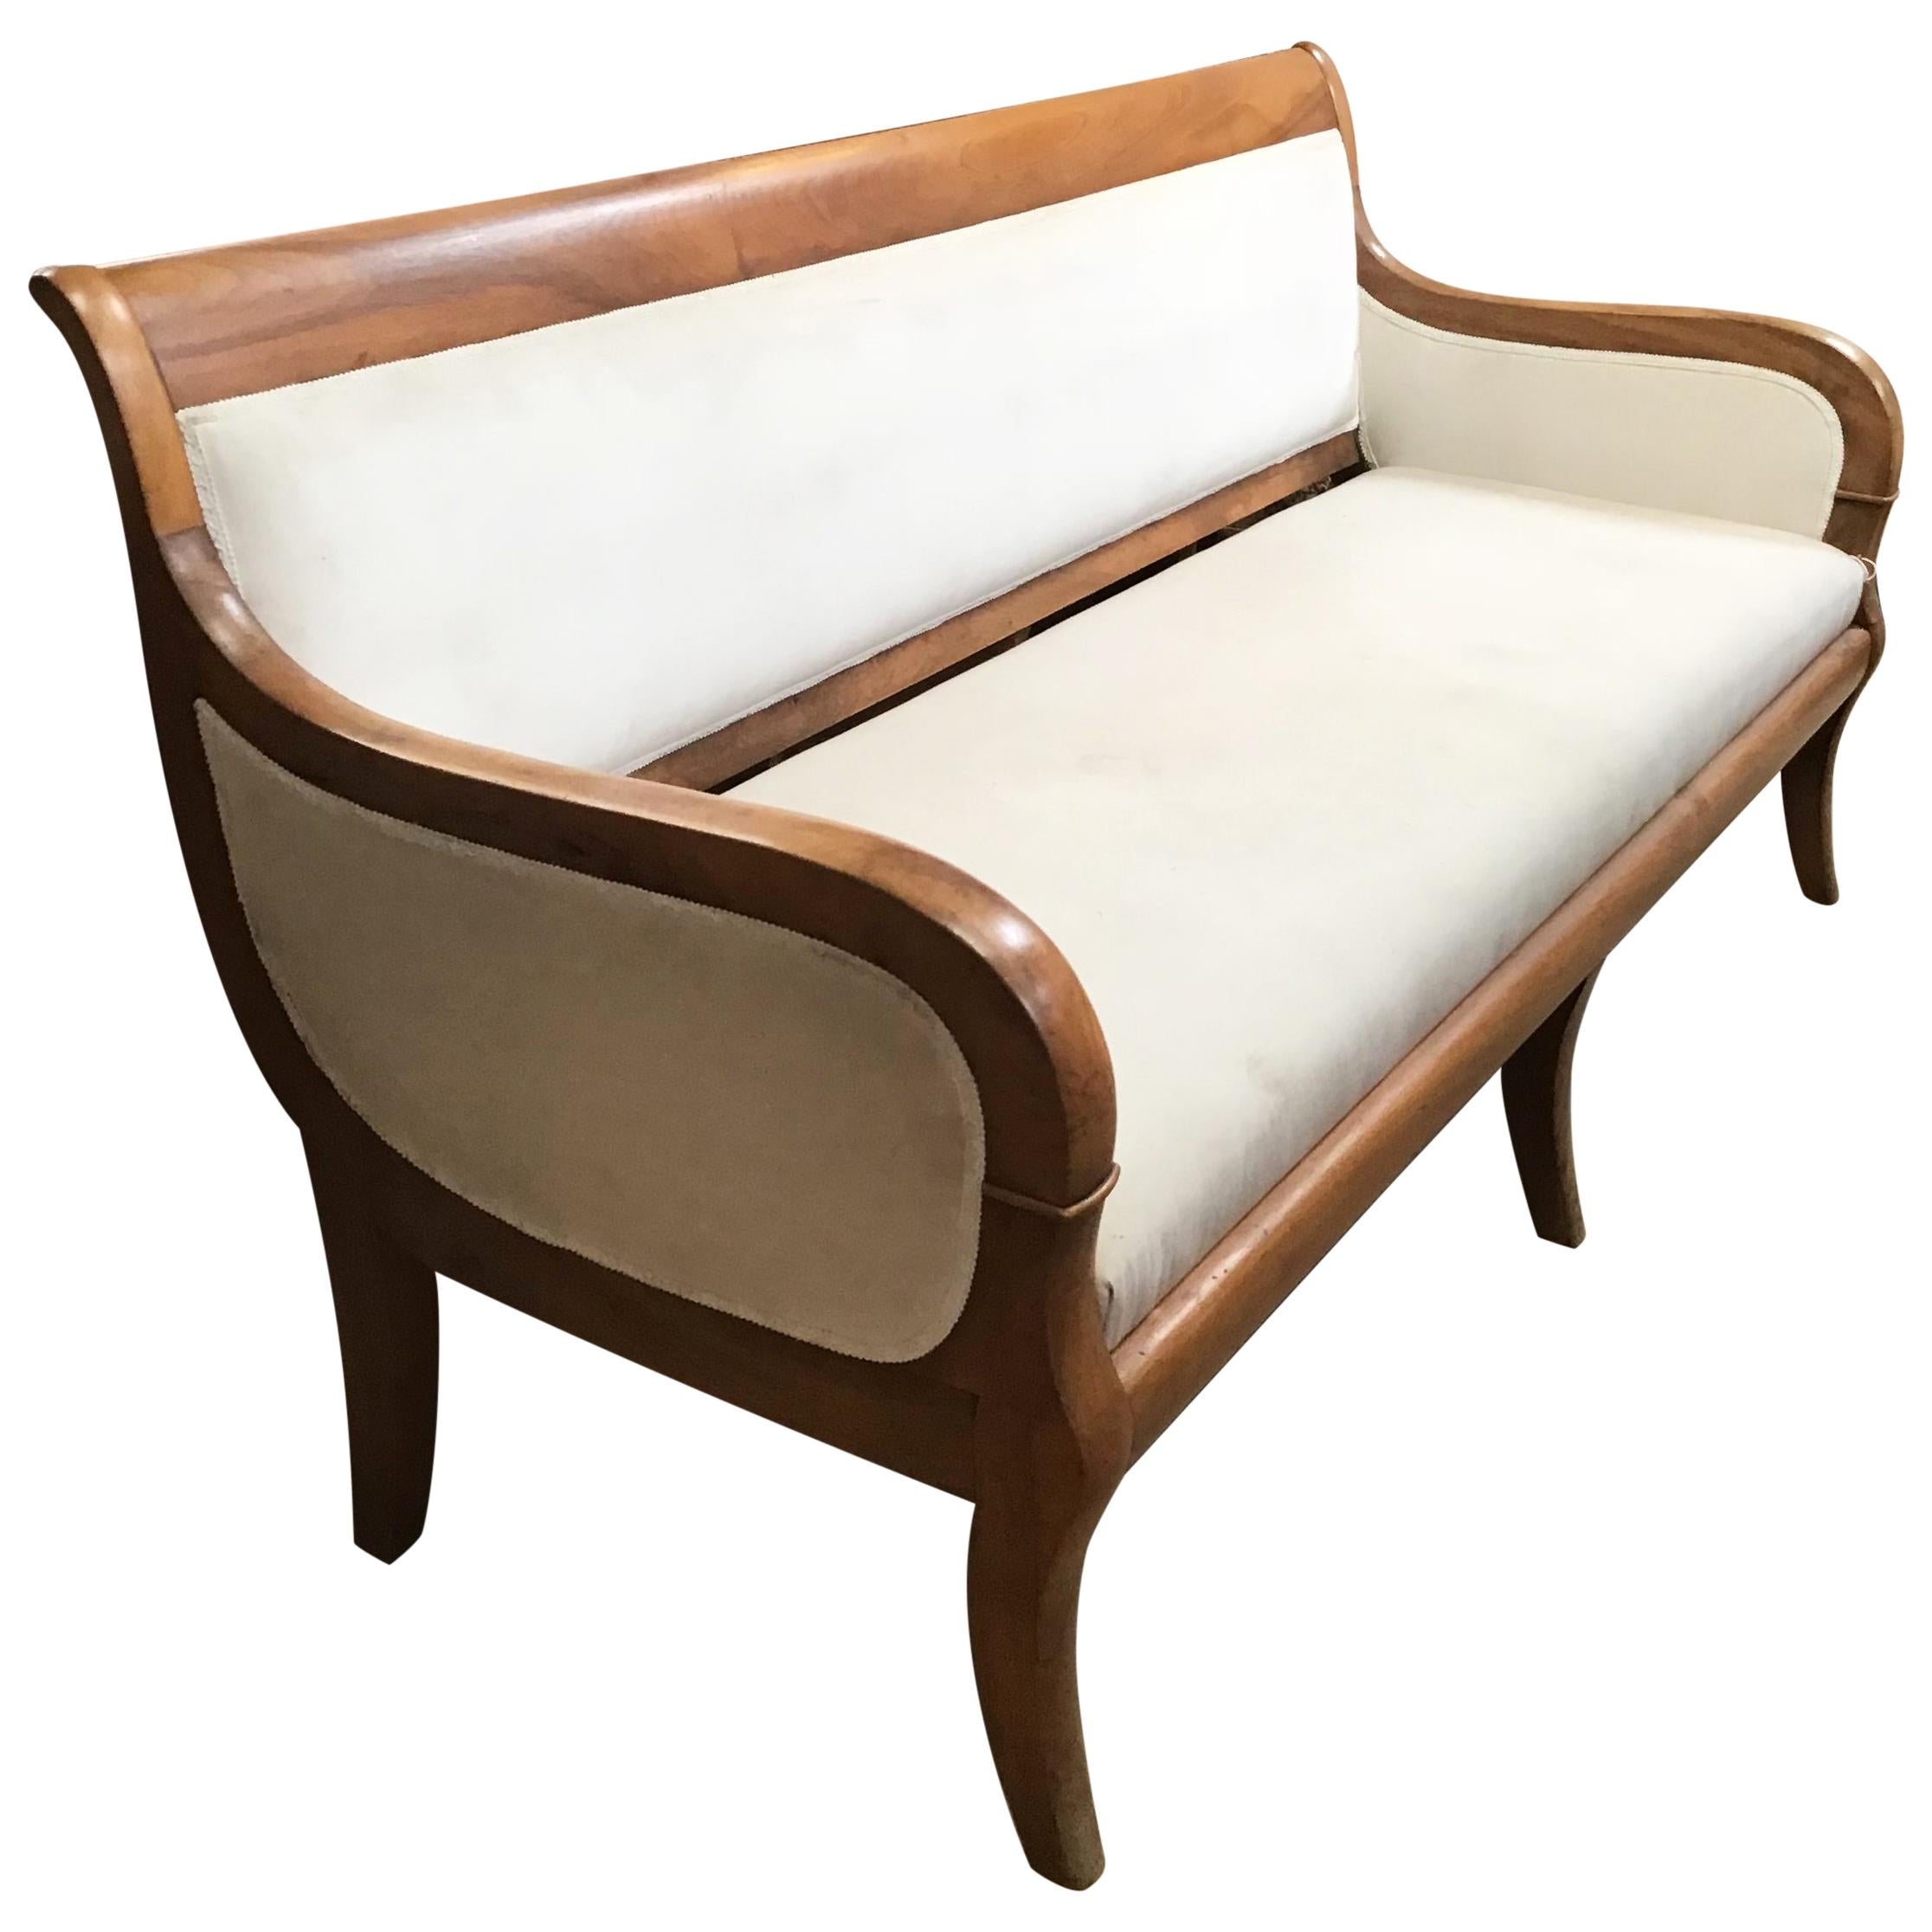 Italian Walnut Sofa with White Upholstery from 1920s For Sale